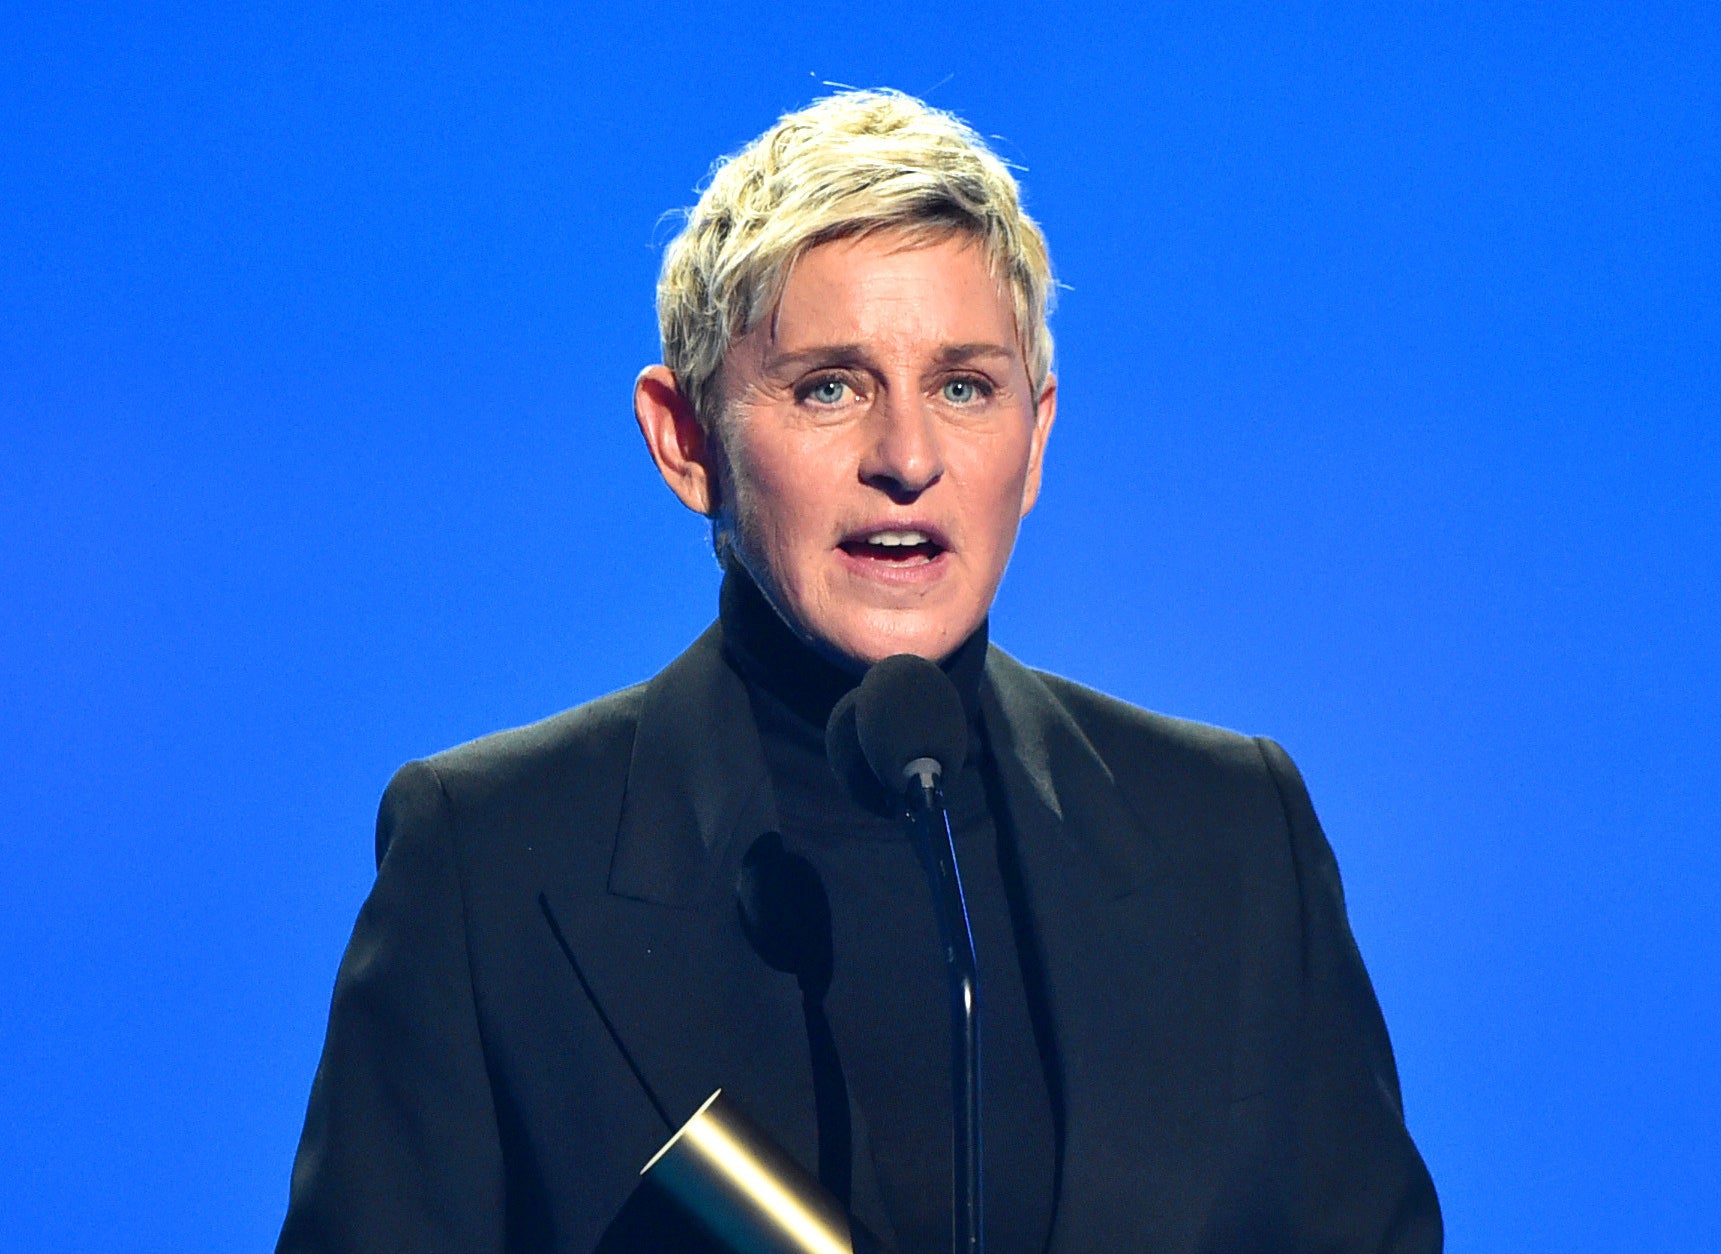 Ellen DeGeneres accepts The Daytime Talk Show of 2021 award for &#x27;The Ellen DeGeneres Show&#x27; on stage during the 2021 People&#x27;s Choice Awards